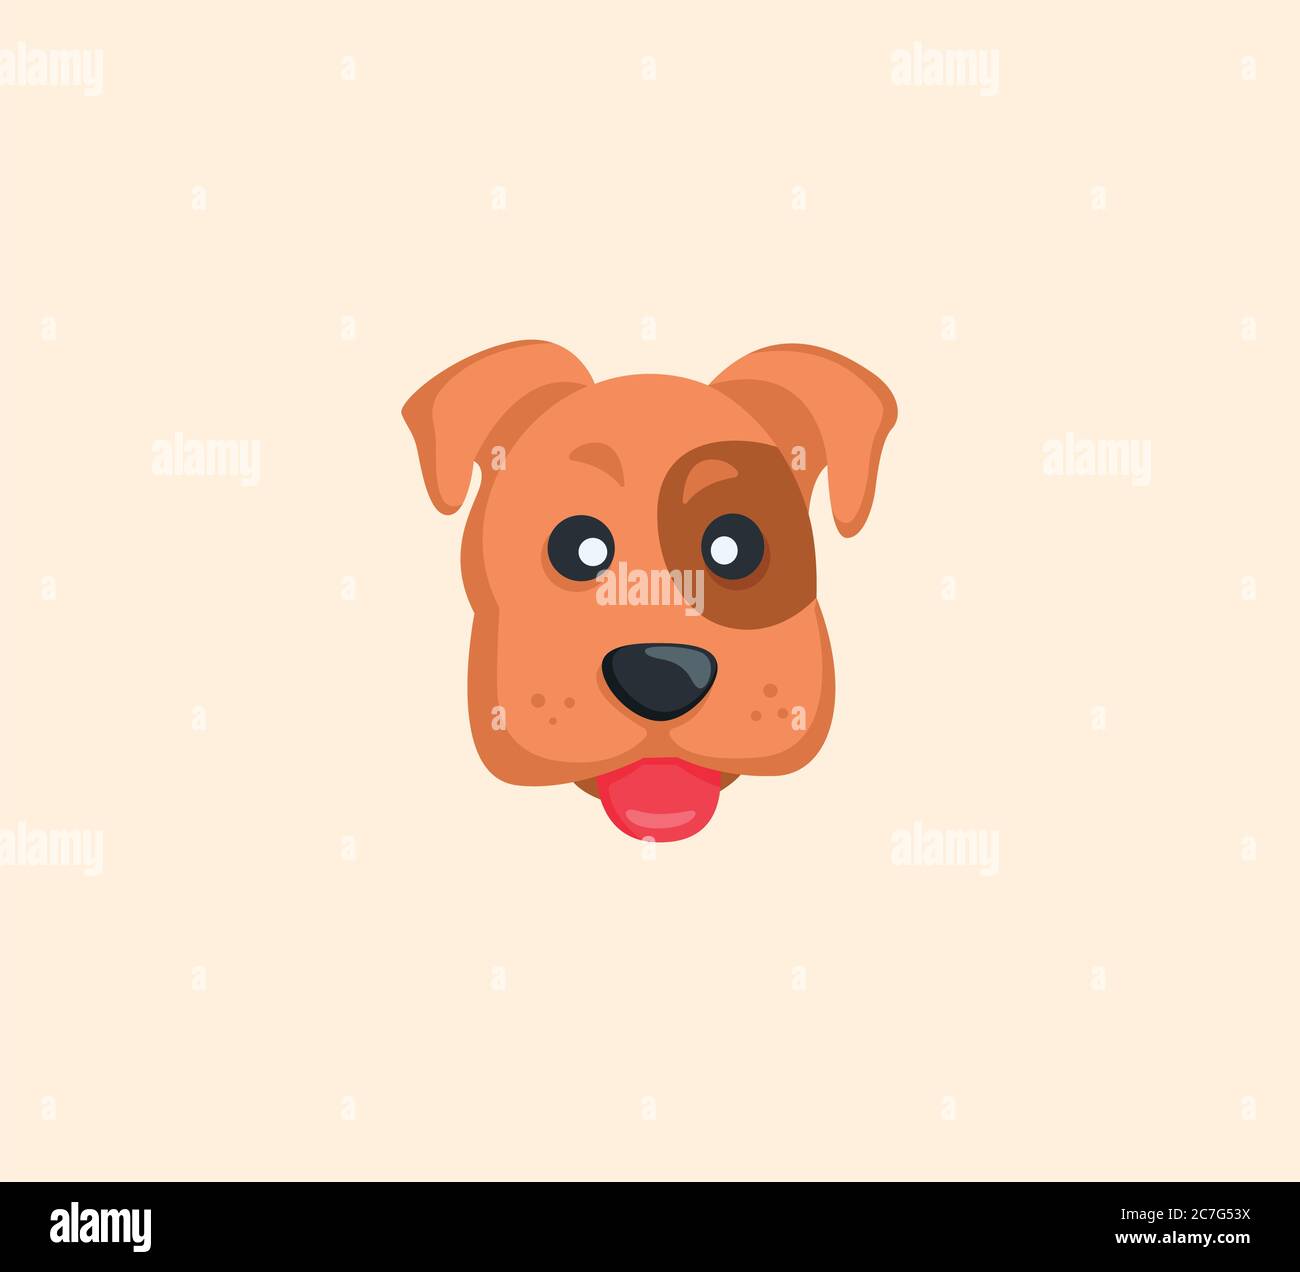 Dog face vector isolated illustration. Dog icon Stock Vector